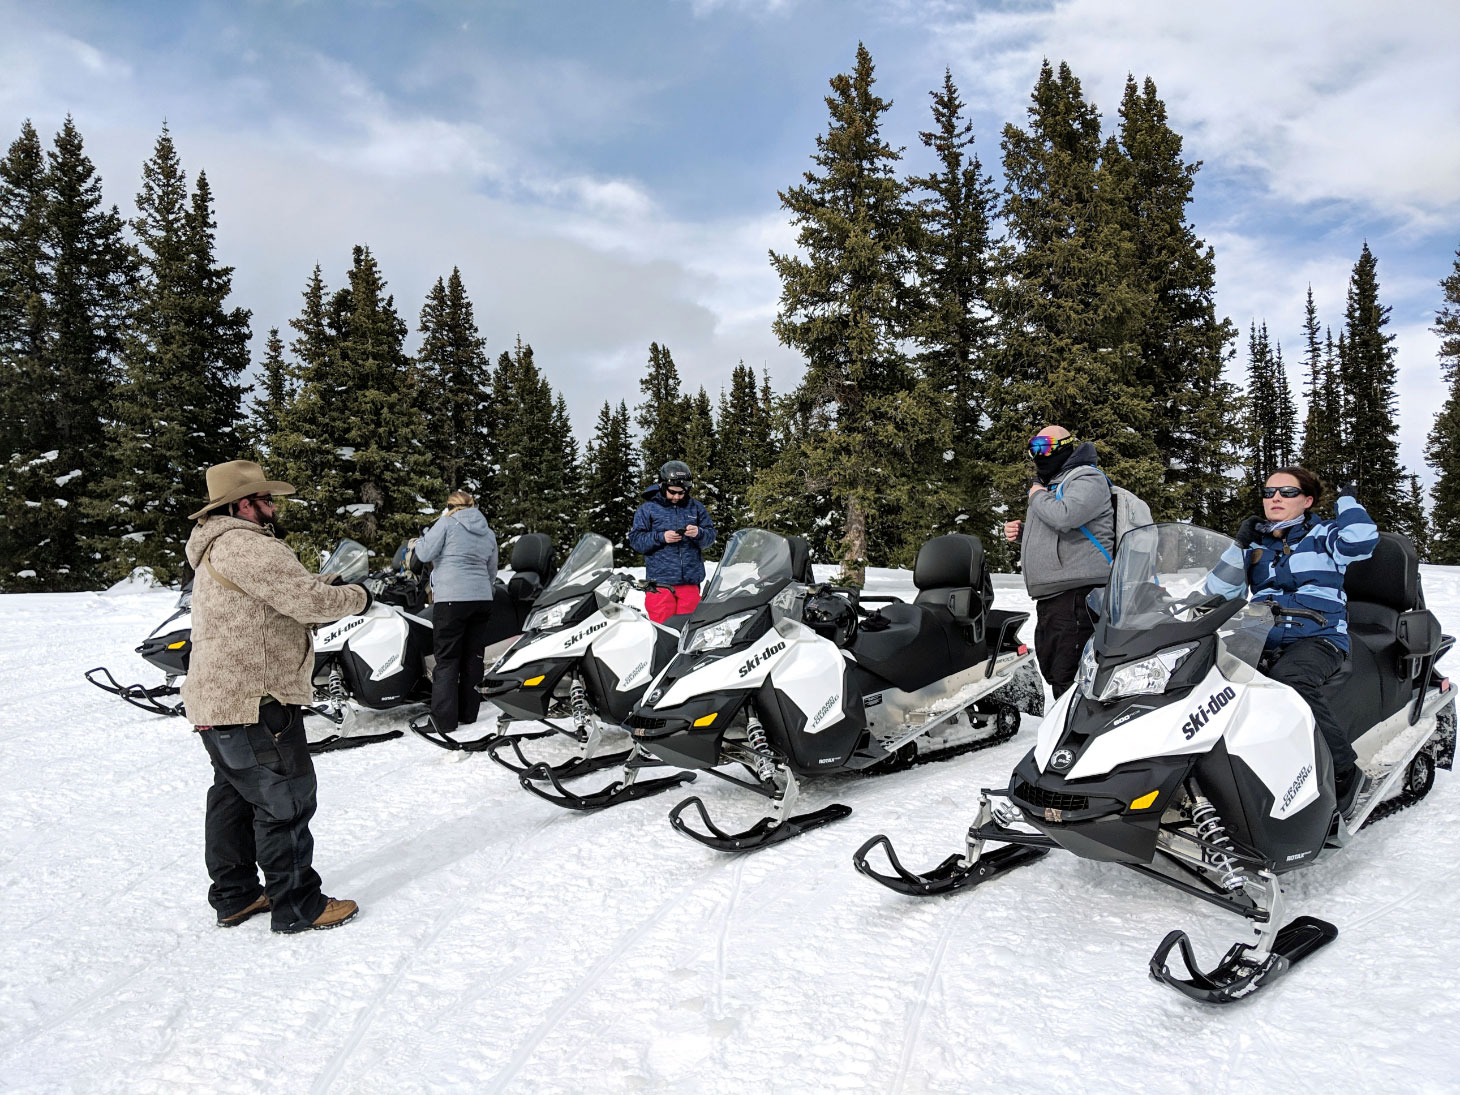 Snowmobilers on snowmobiles with trees in background